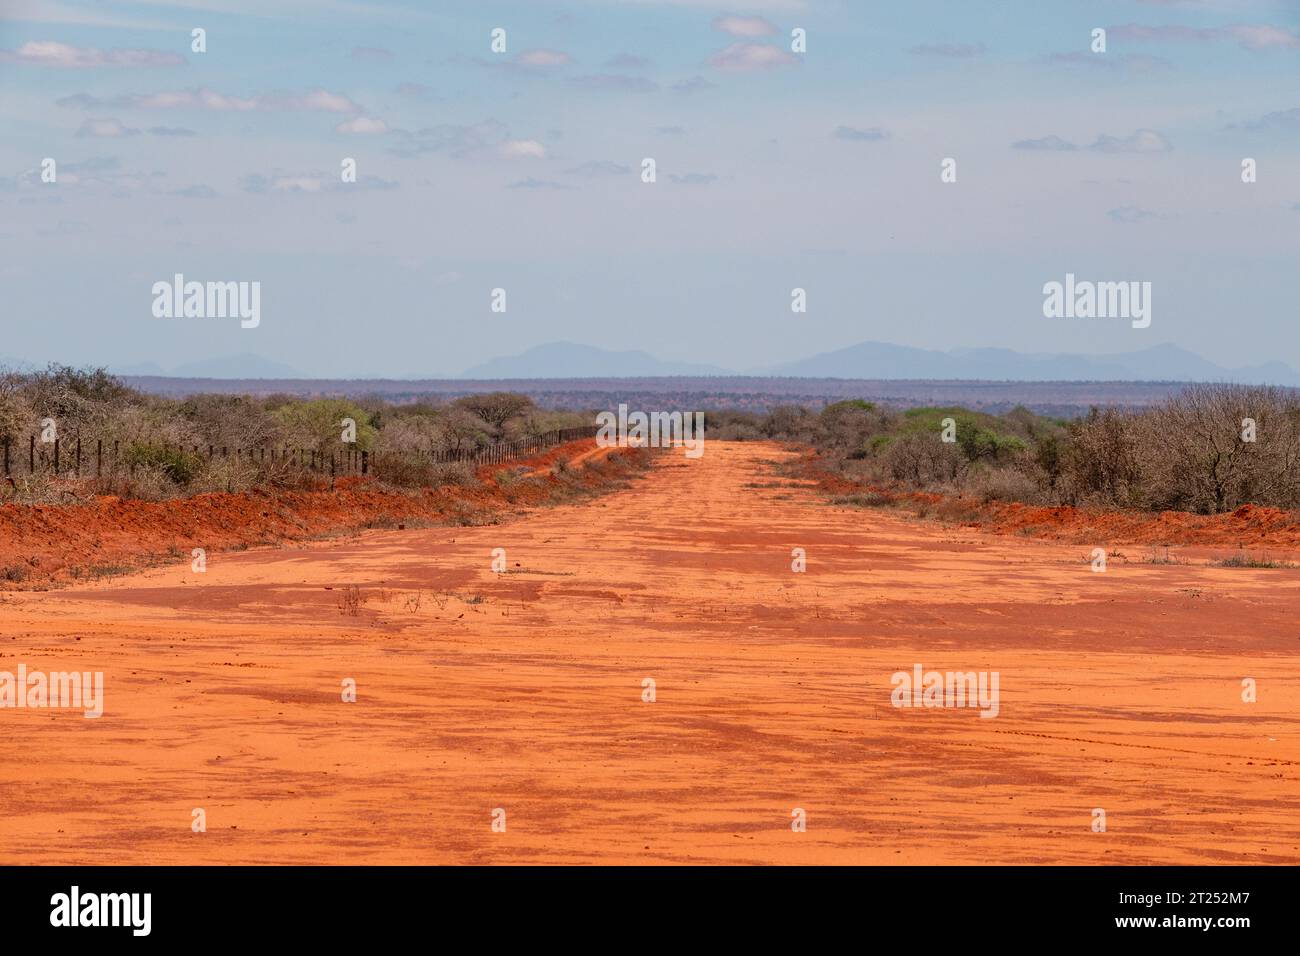 A dirt road airstrip in the wild at Tsavo East National Park in Kenya Stock Photo